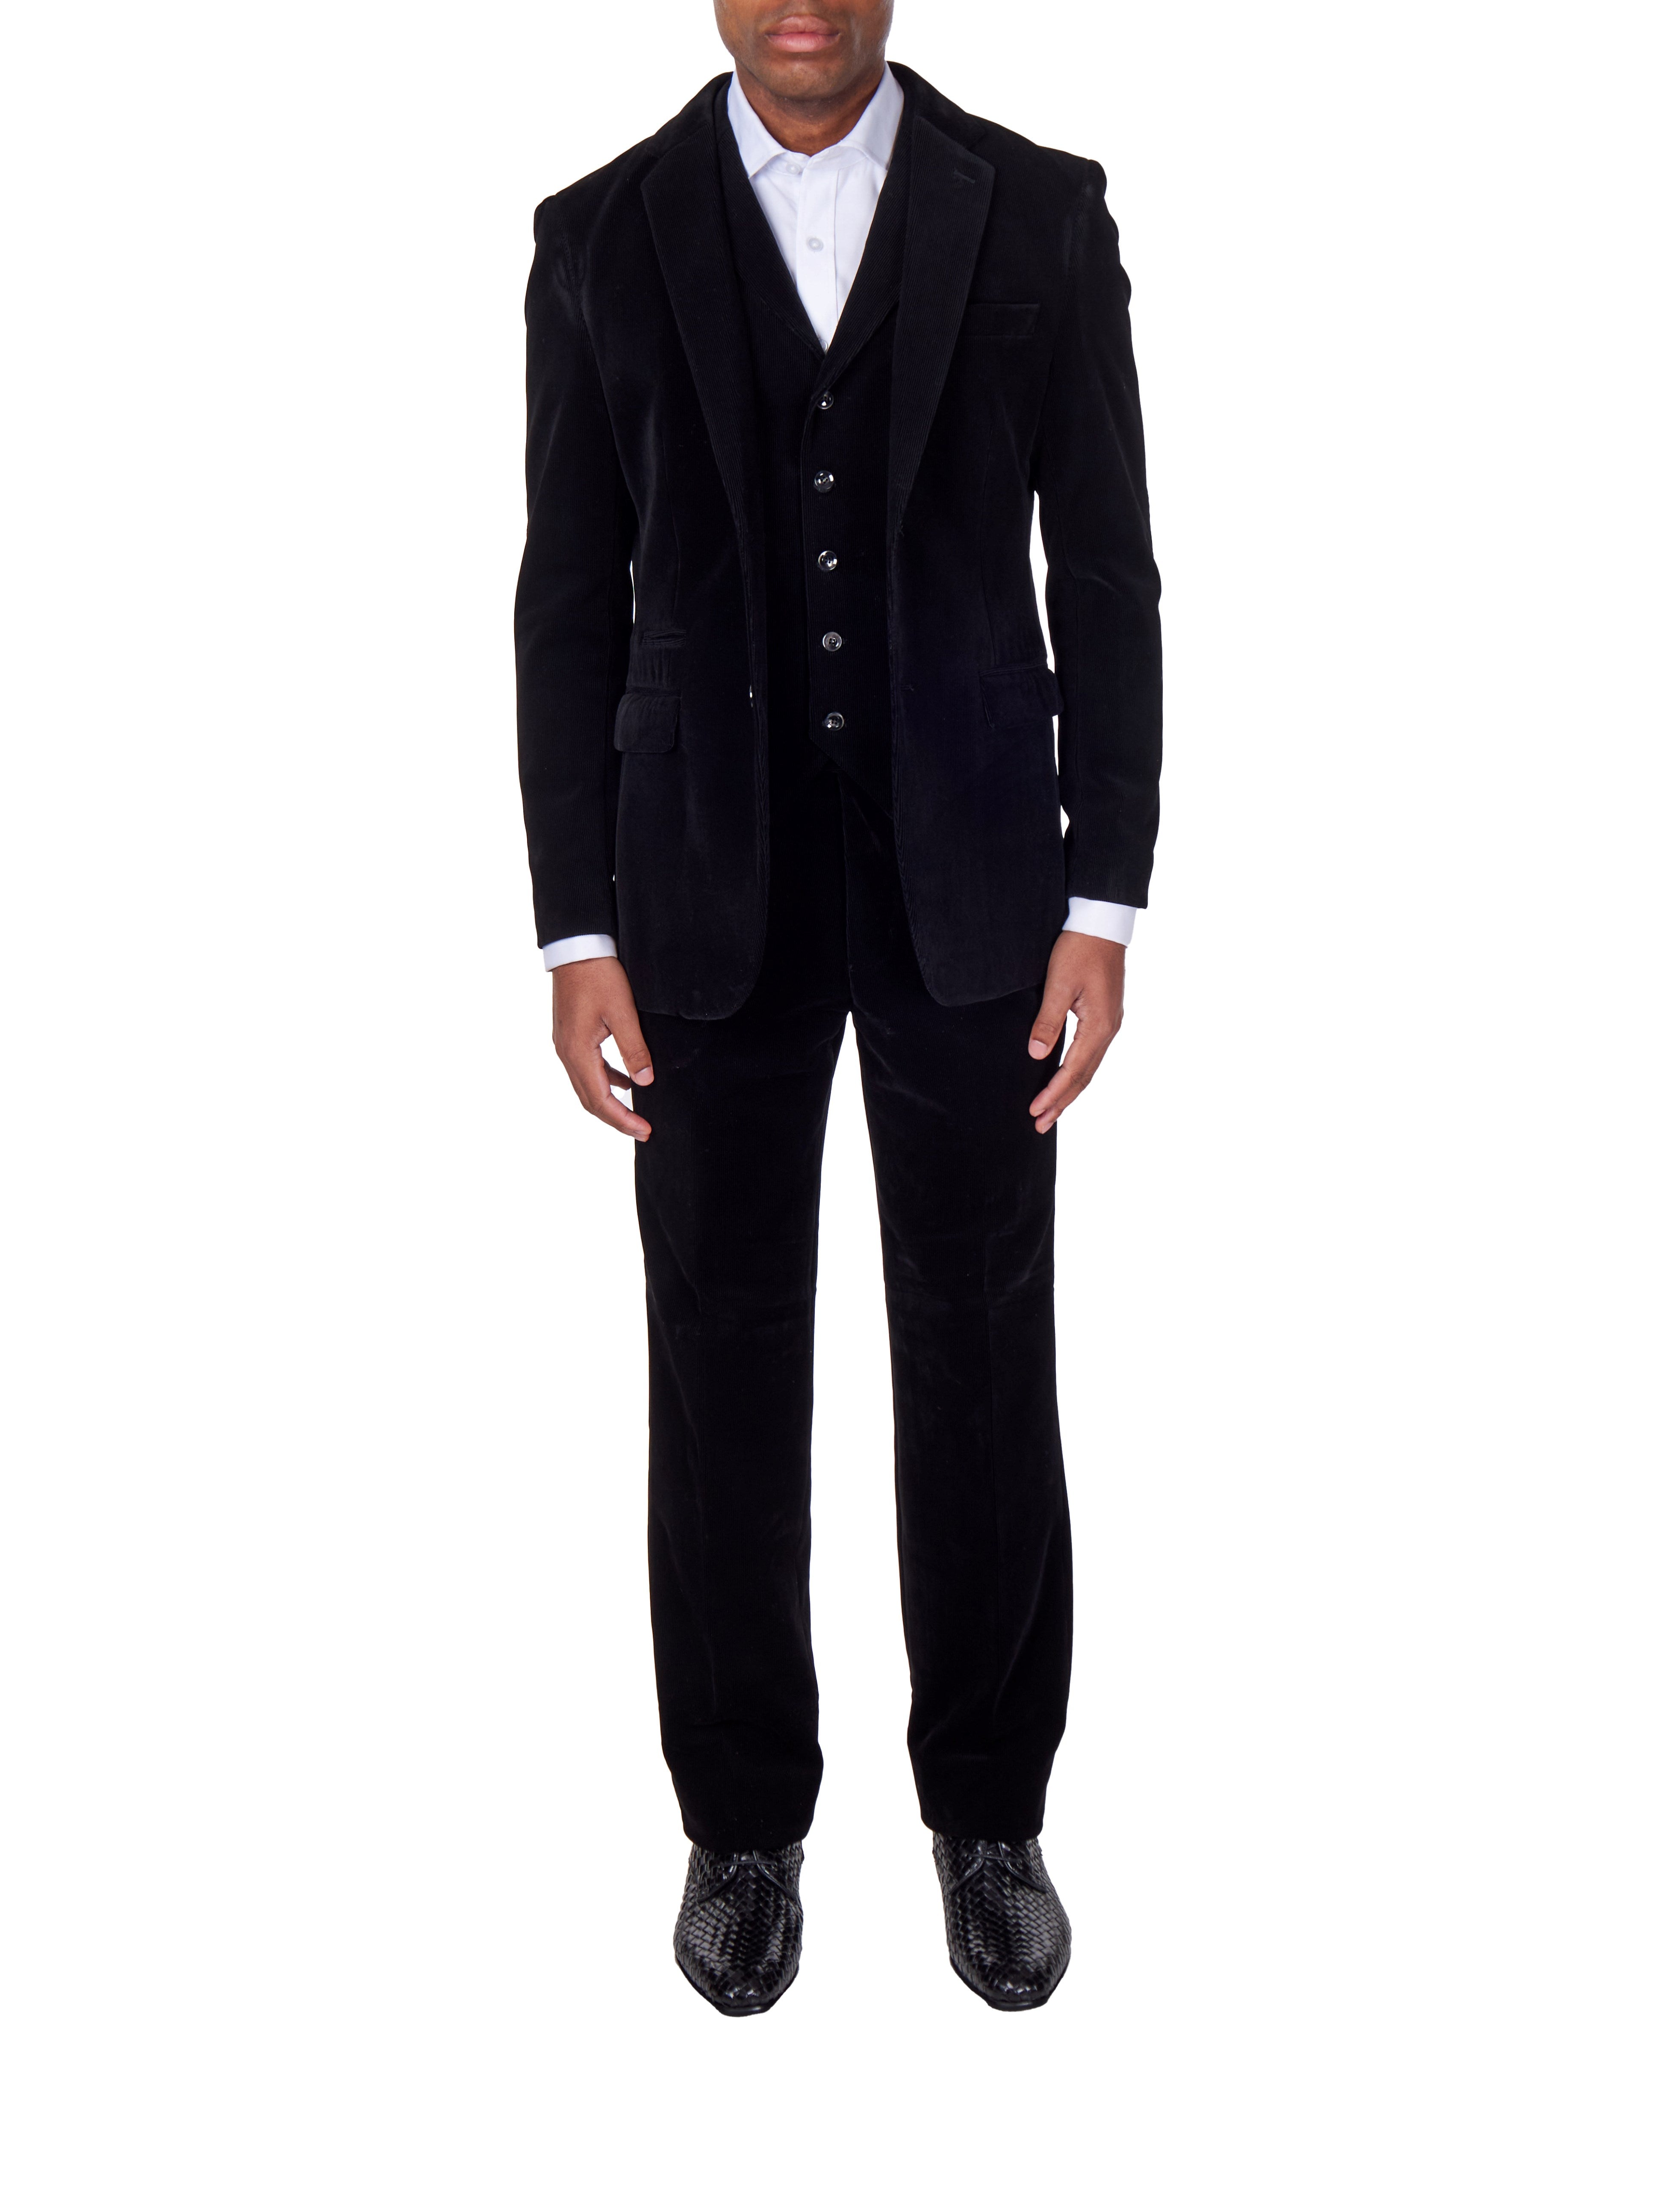 CORDUORY TAILORED FIT SUIT IN BLACK